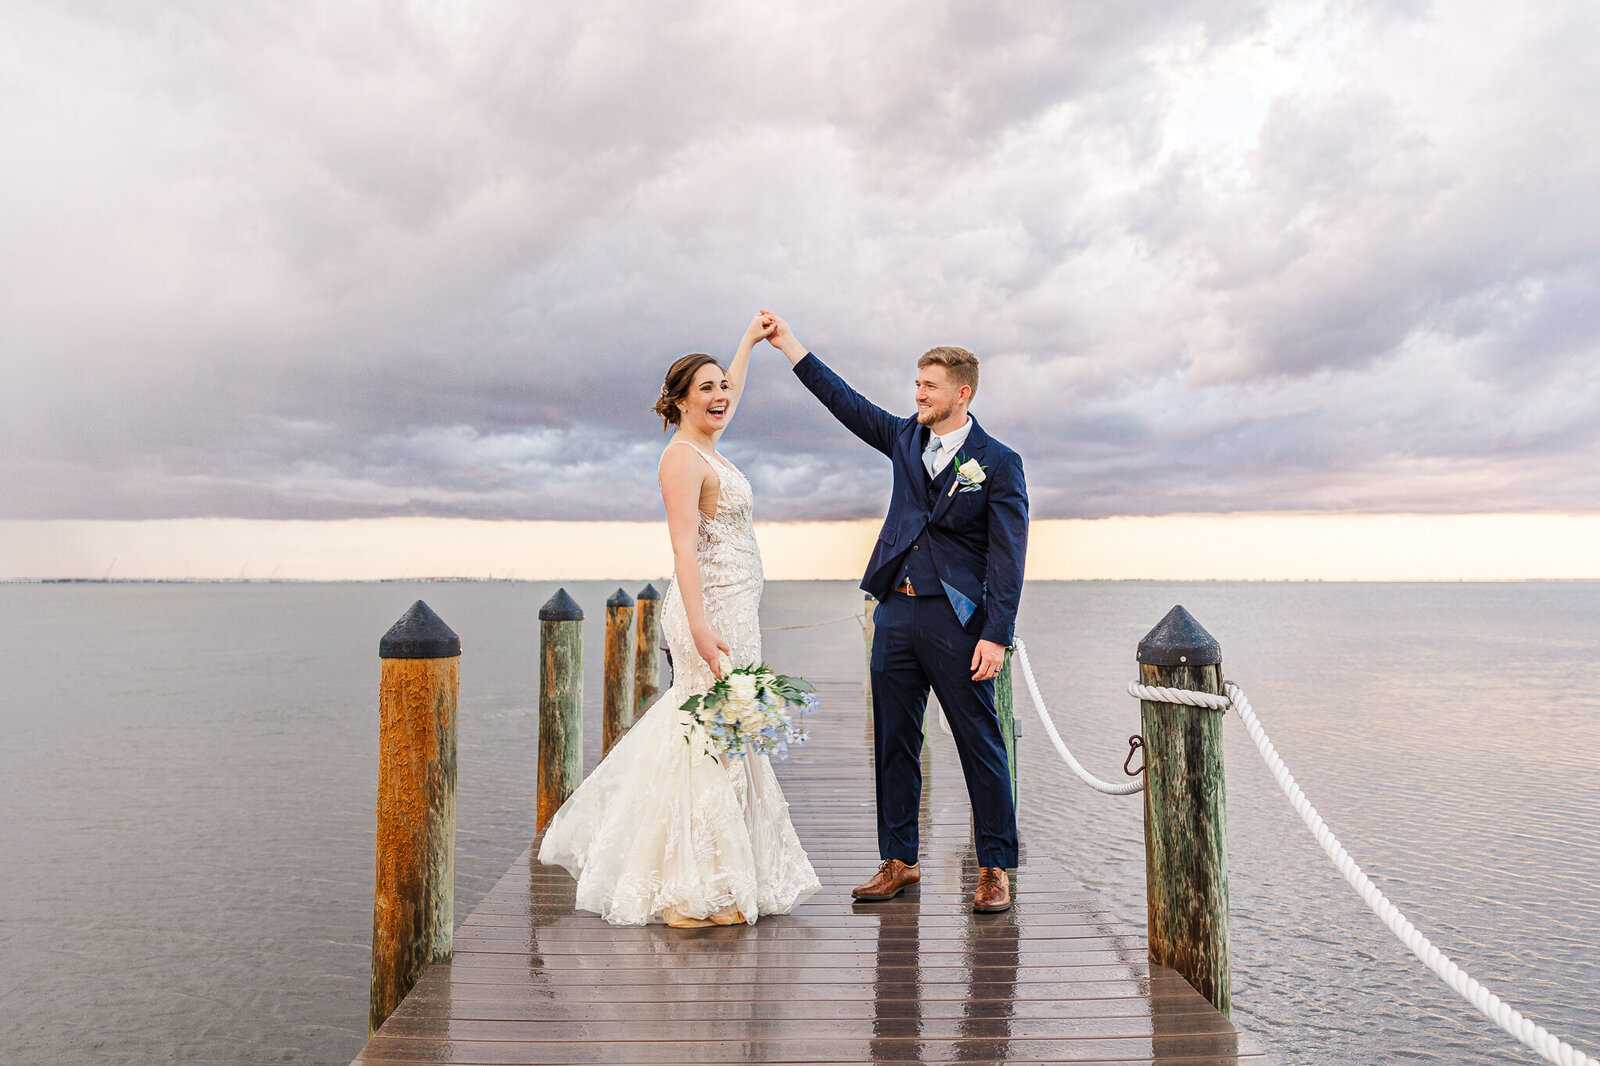 a bride and groom dance on a pier at sunset